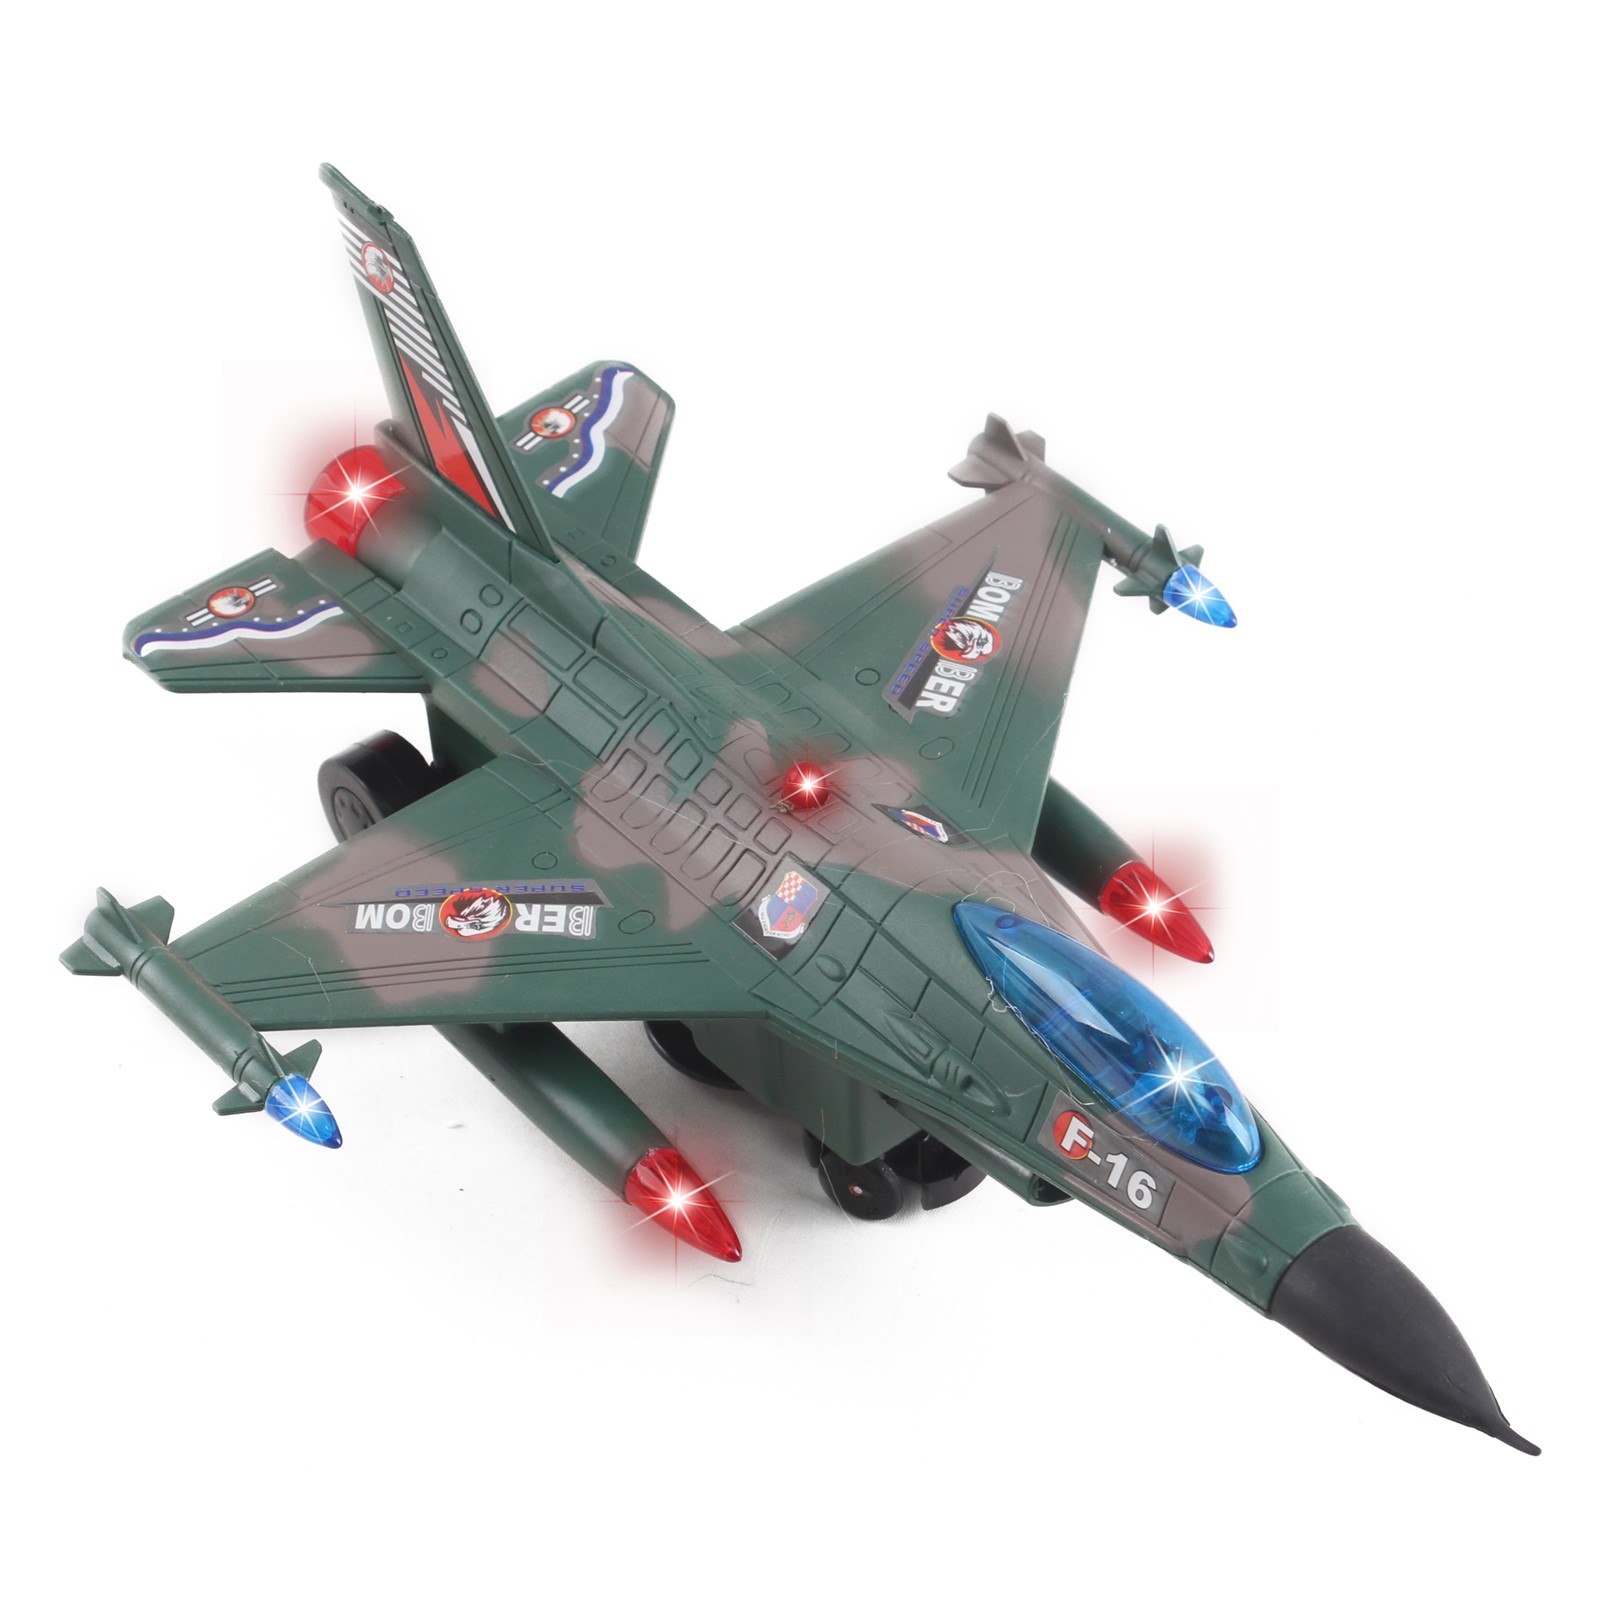 Toy Army Air Force Fighter Jet F16 Battery Operated Kid's Bump and Go Toy Plane With Flashing Lights And Sounds Bumps Into Something and Will Change Direction Perfect For Boys And Girls (Green)